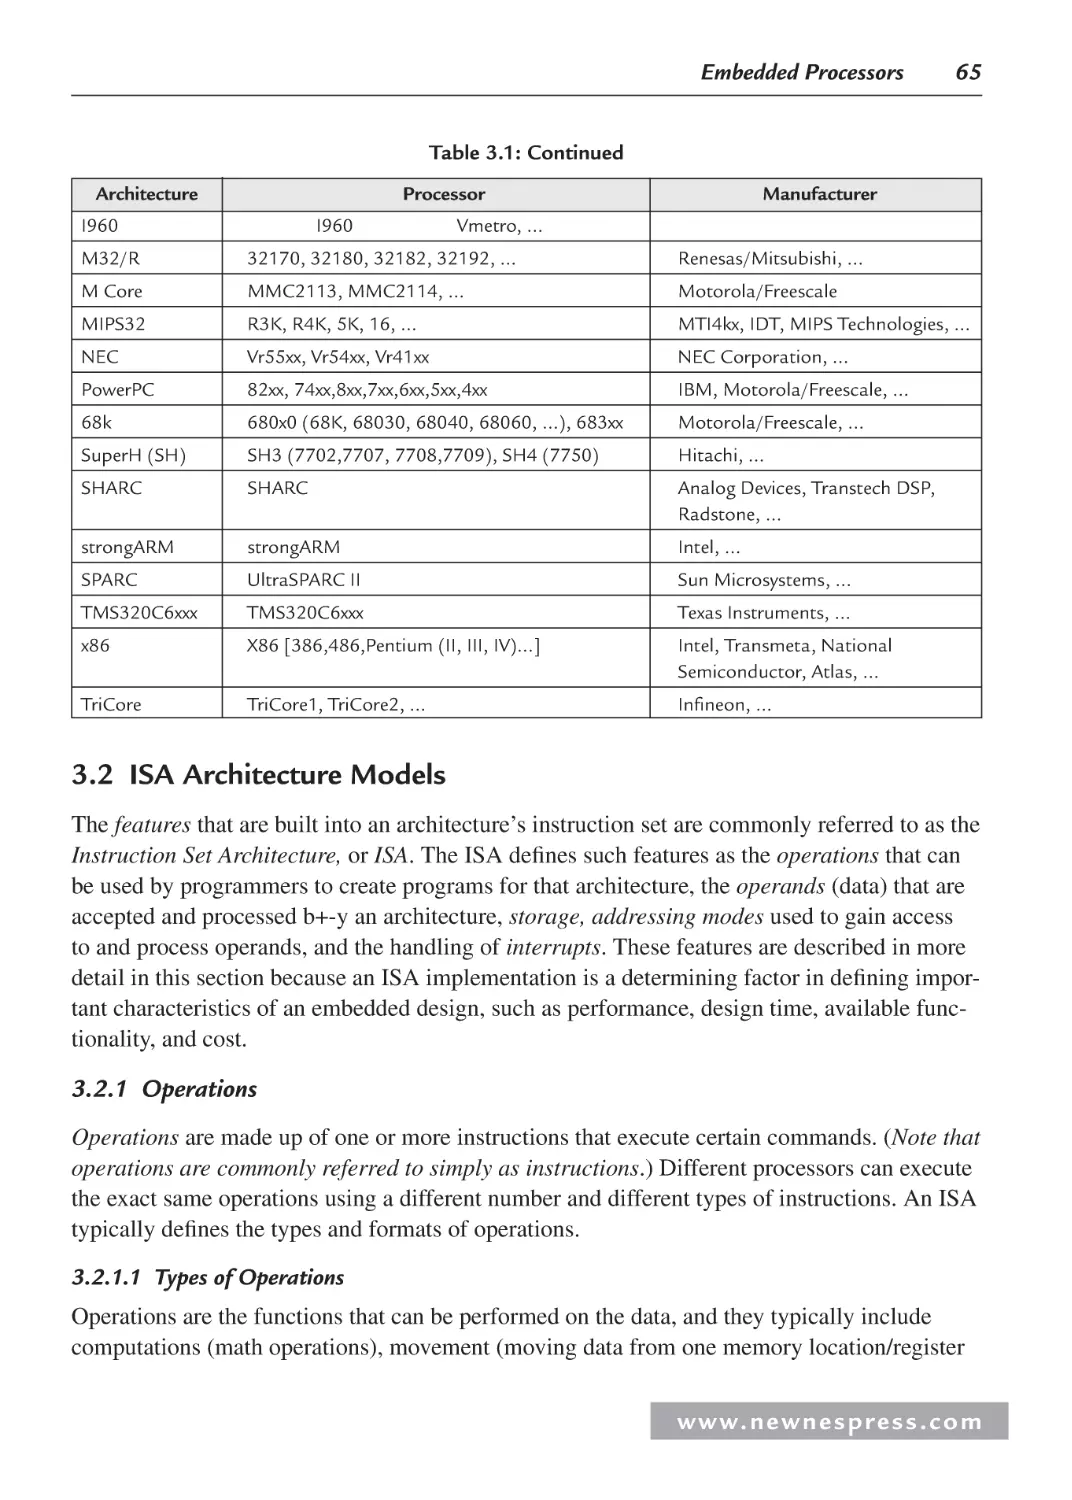 3.2 ISA Architecture Models